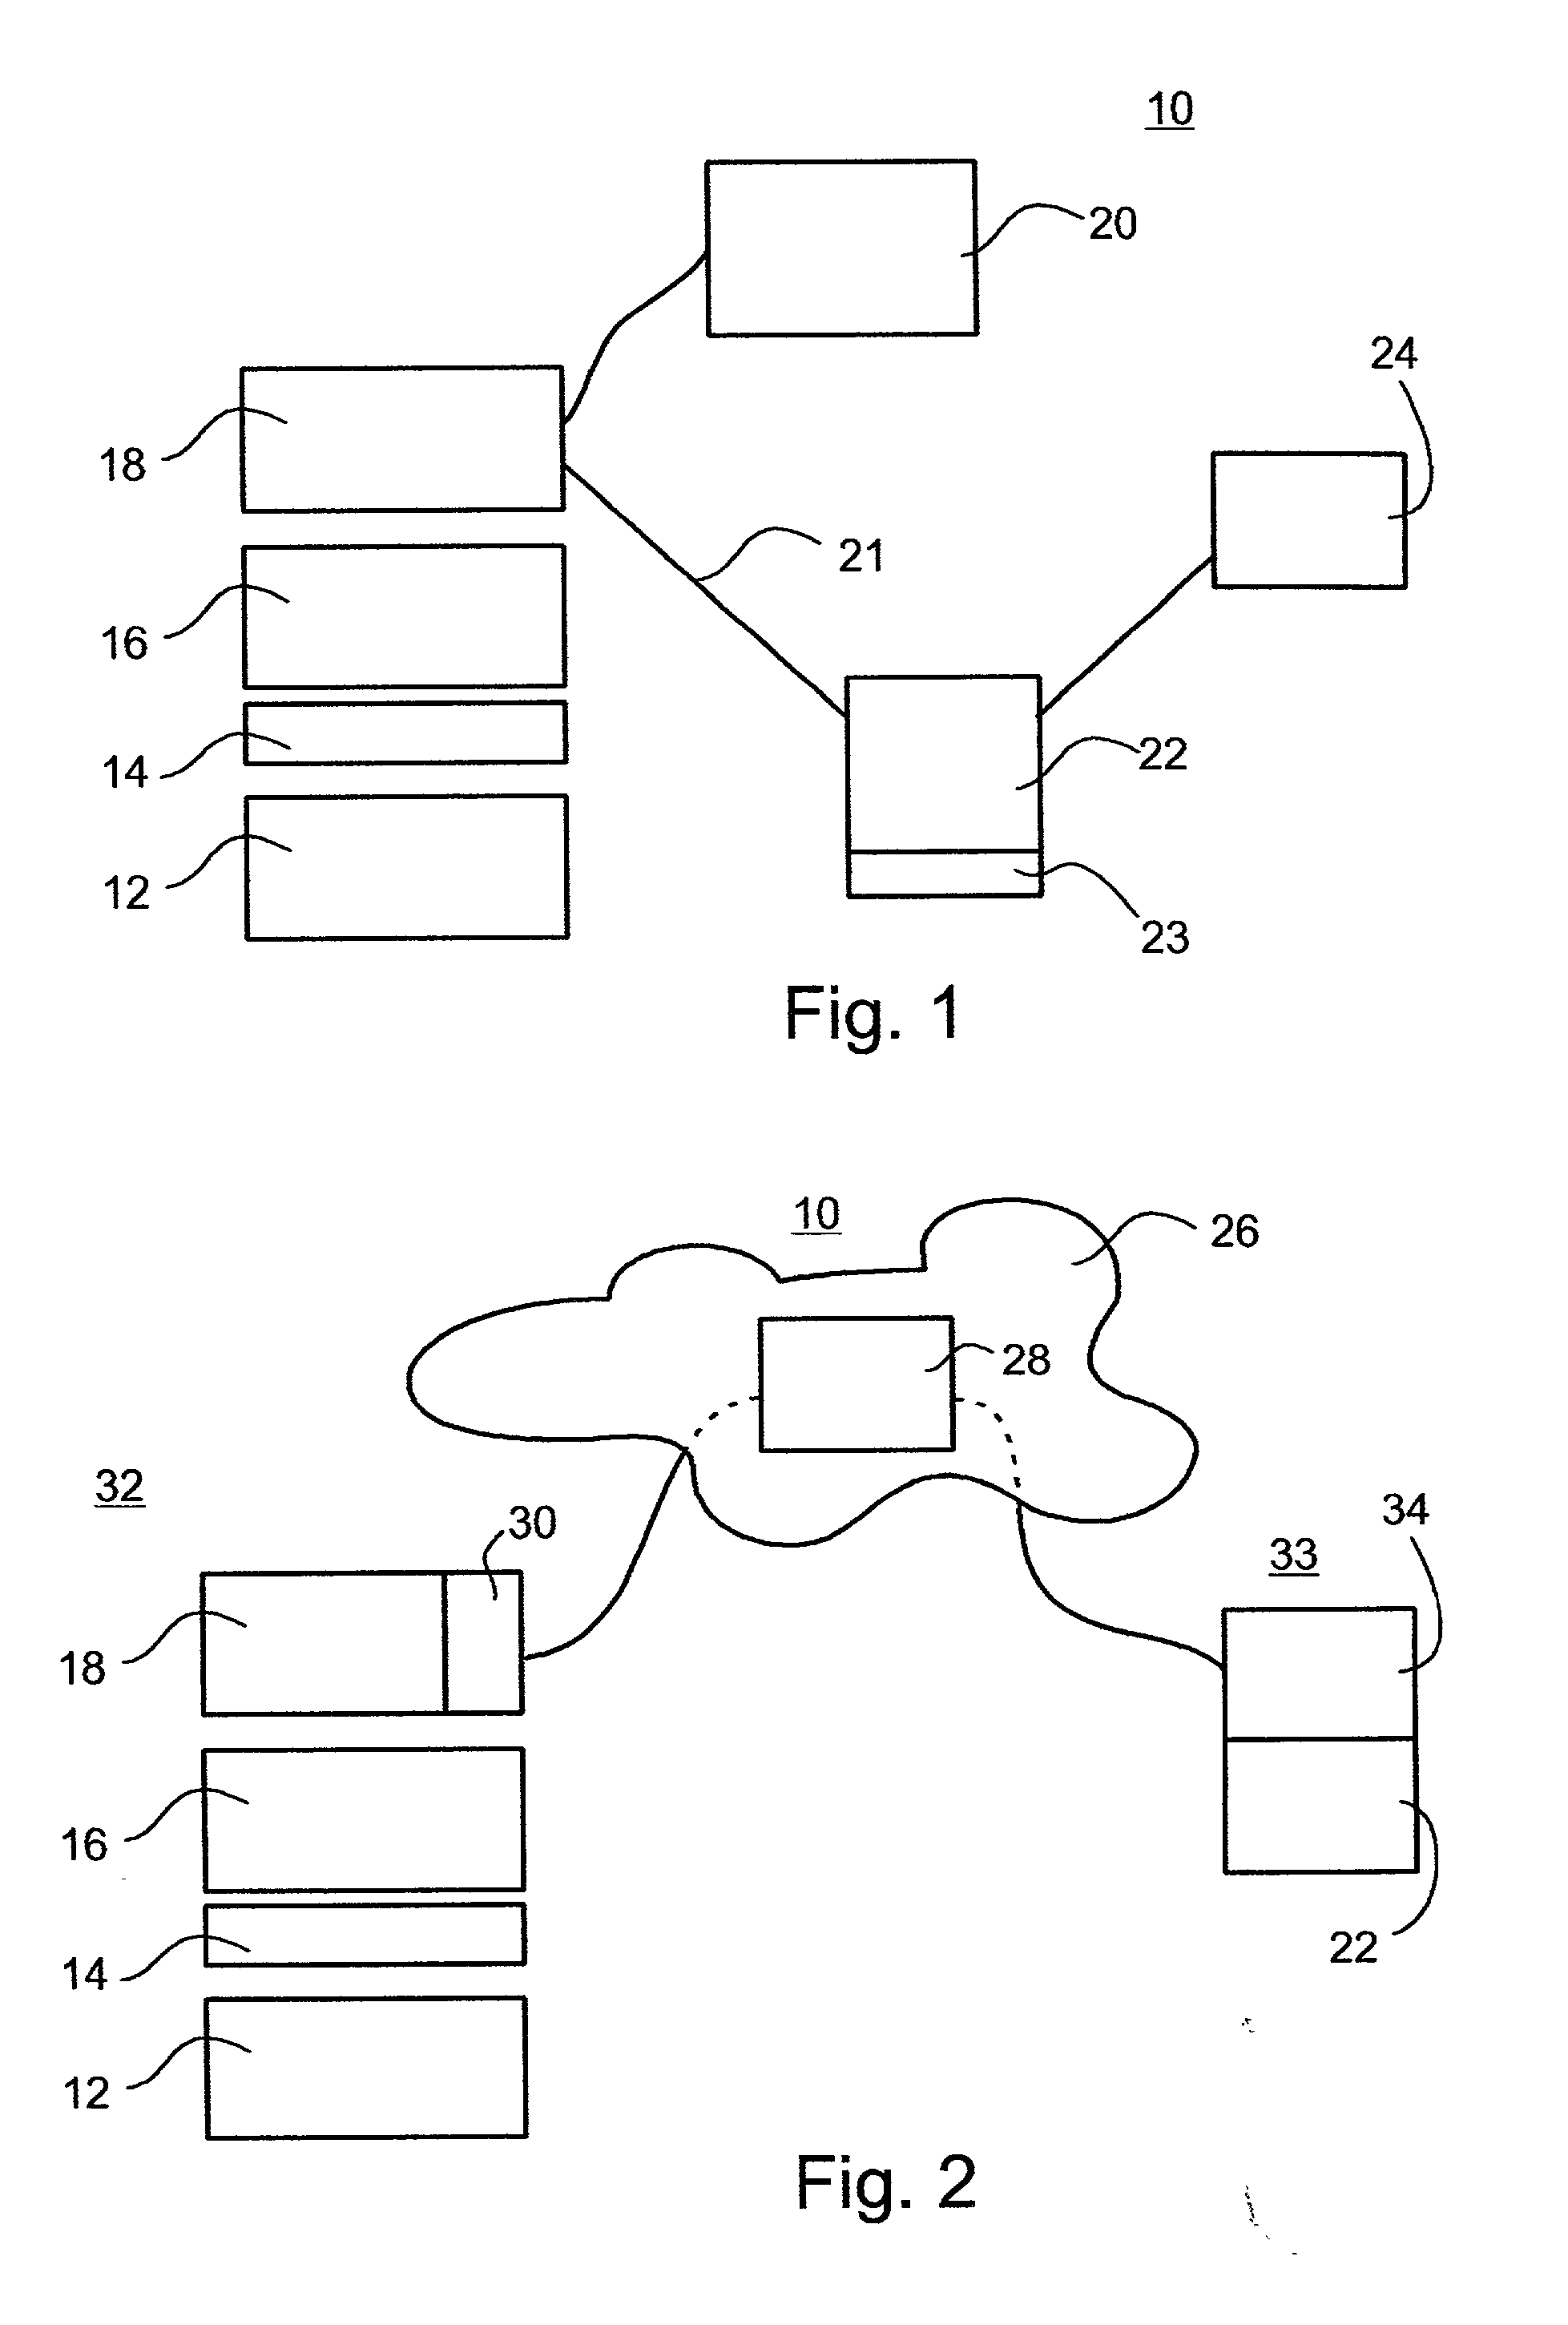 System and method for generating a profile of particulate components of a body fluid sample